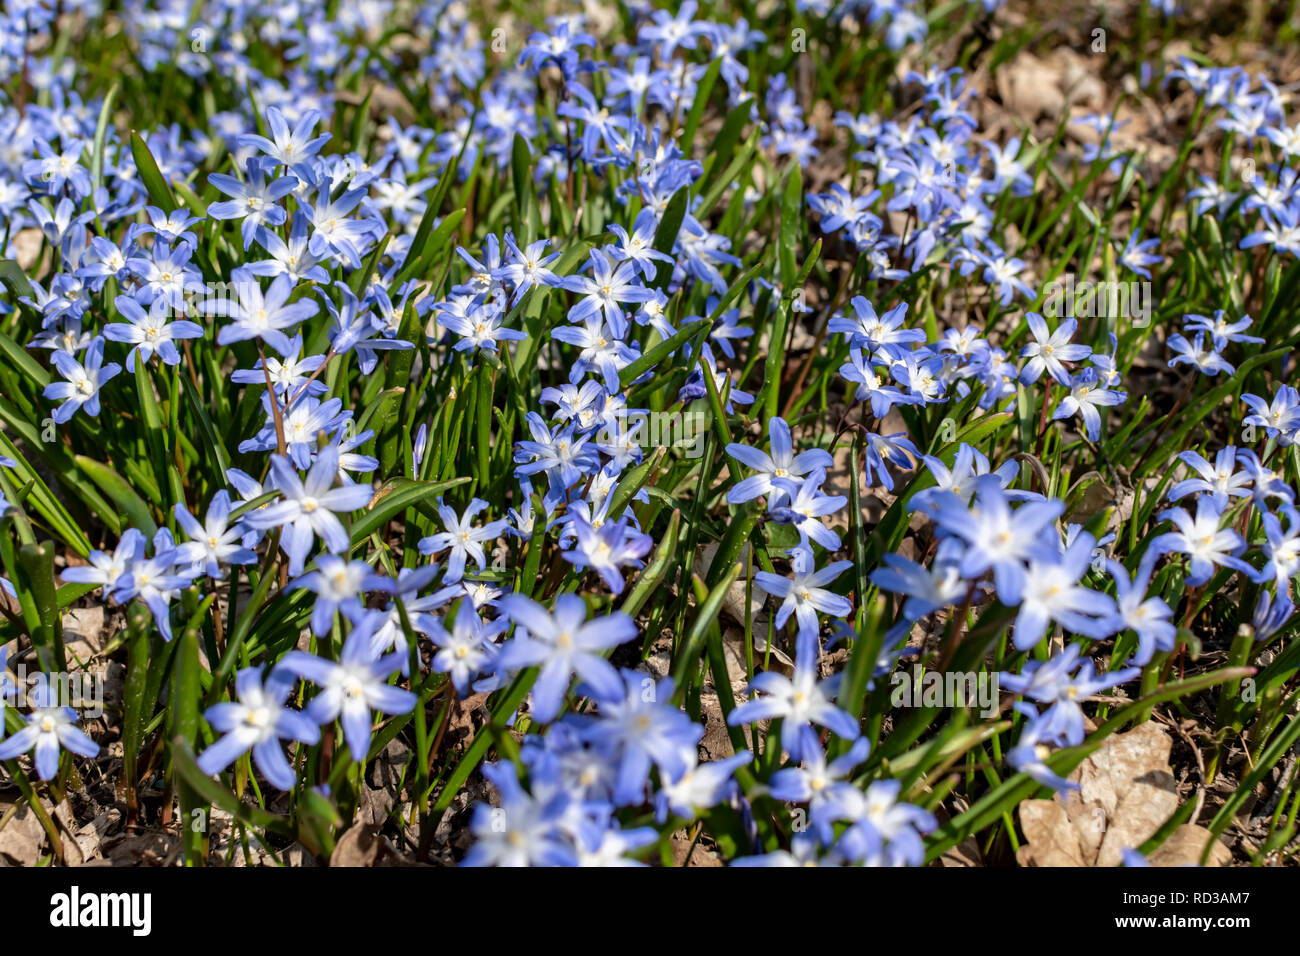 Close-up from many spring flowers named squill (genus Scilla), which grow on a forest glade. Stock Photo